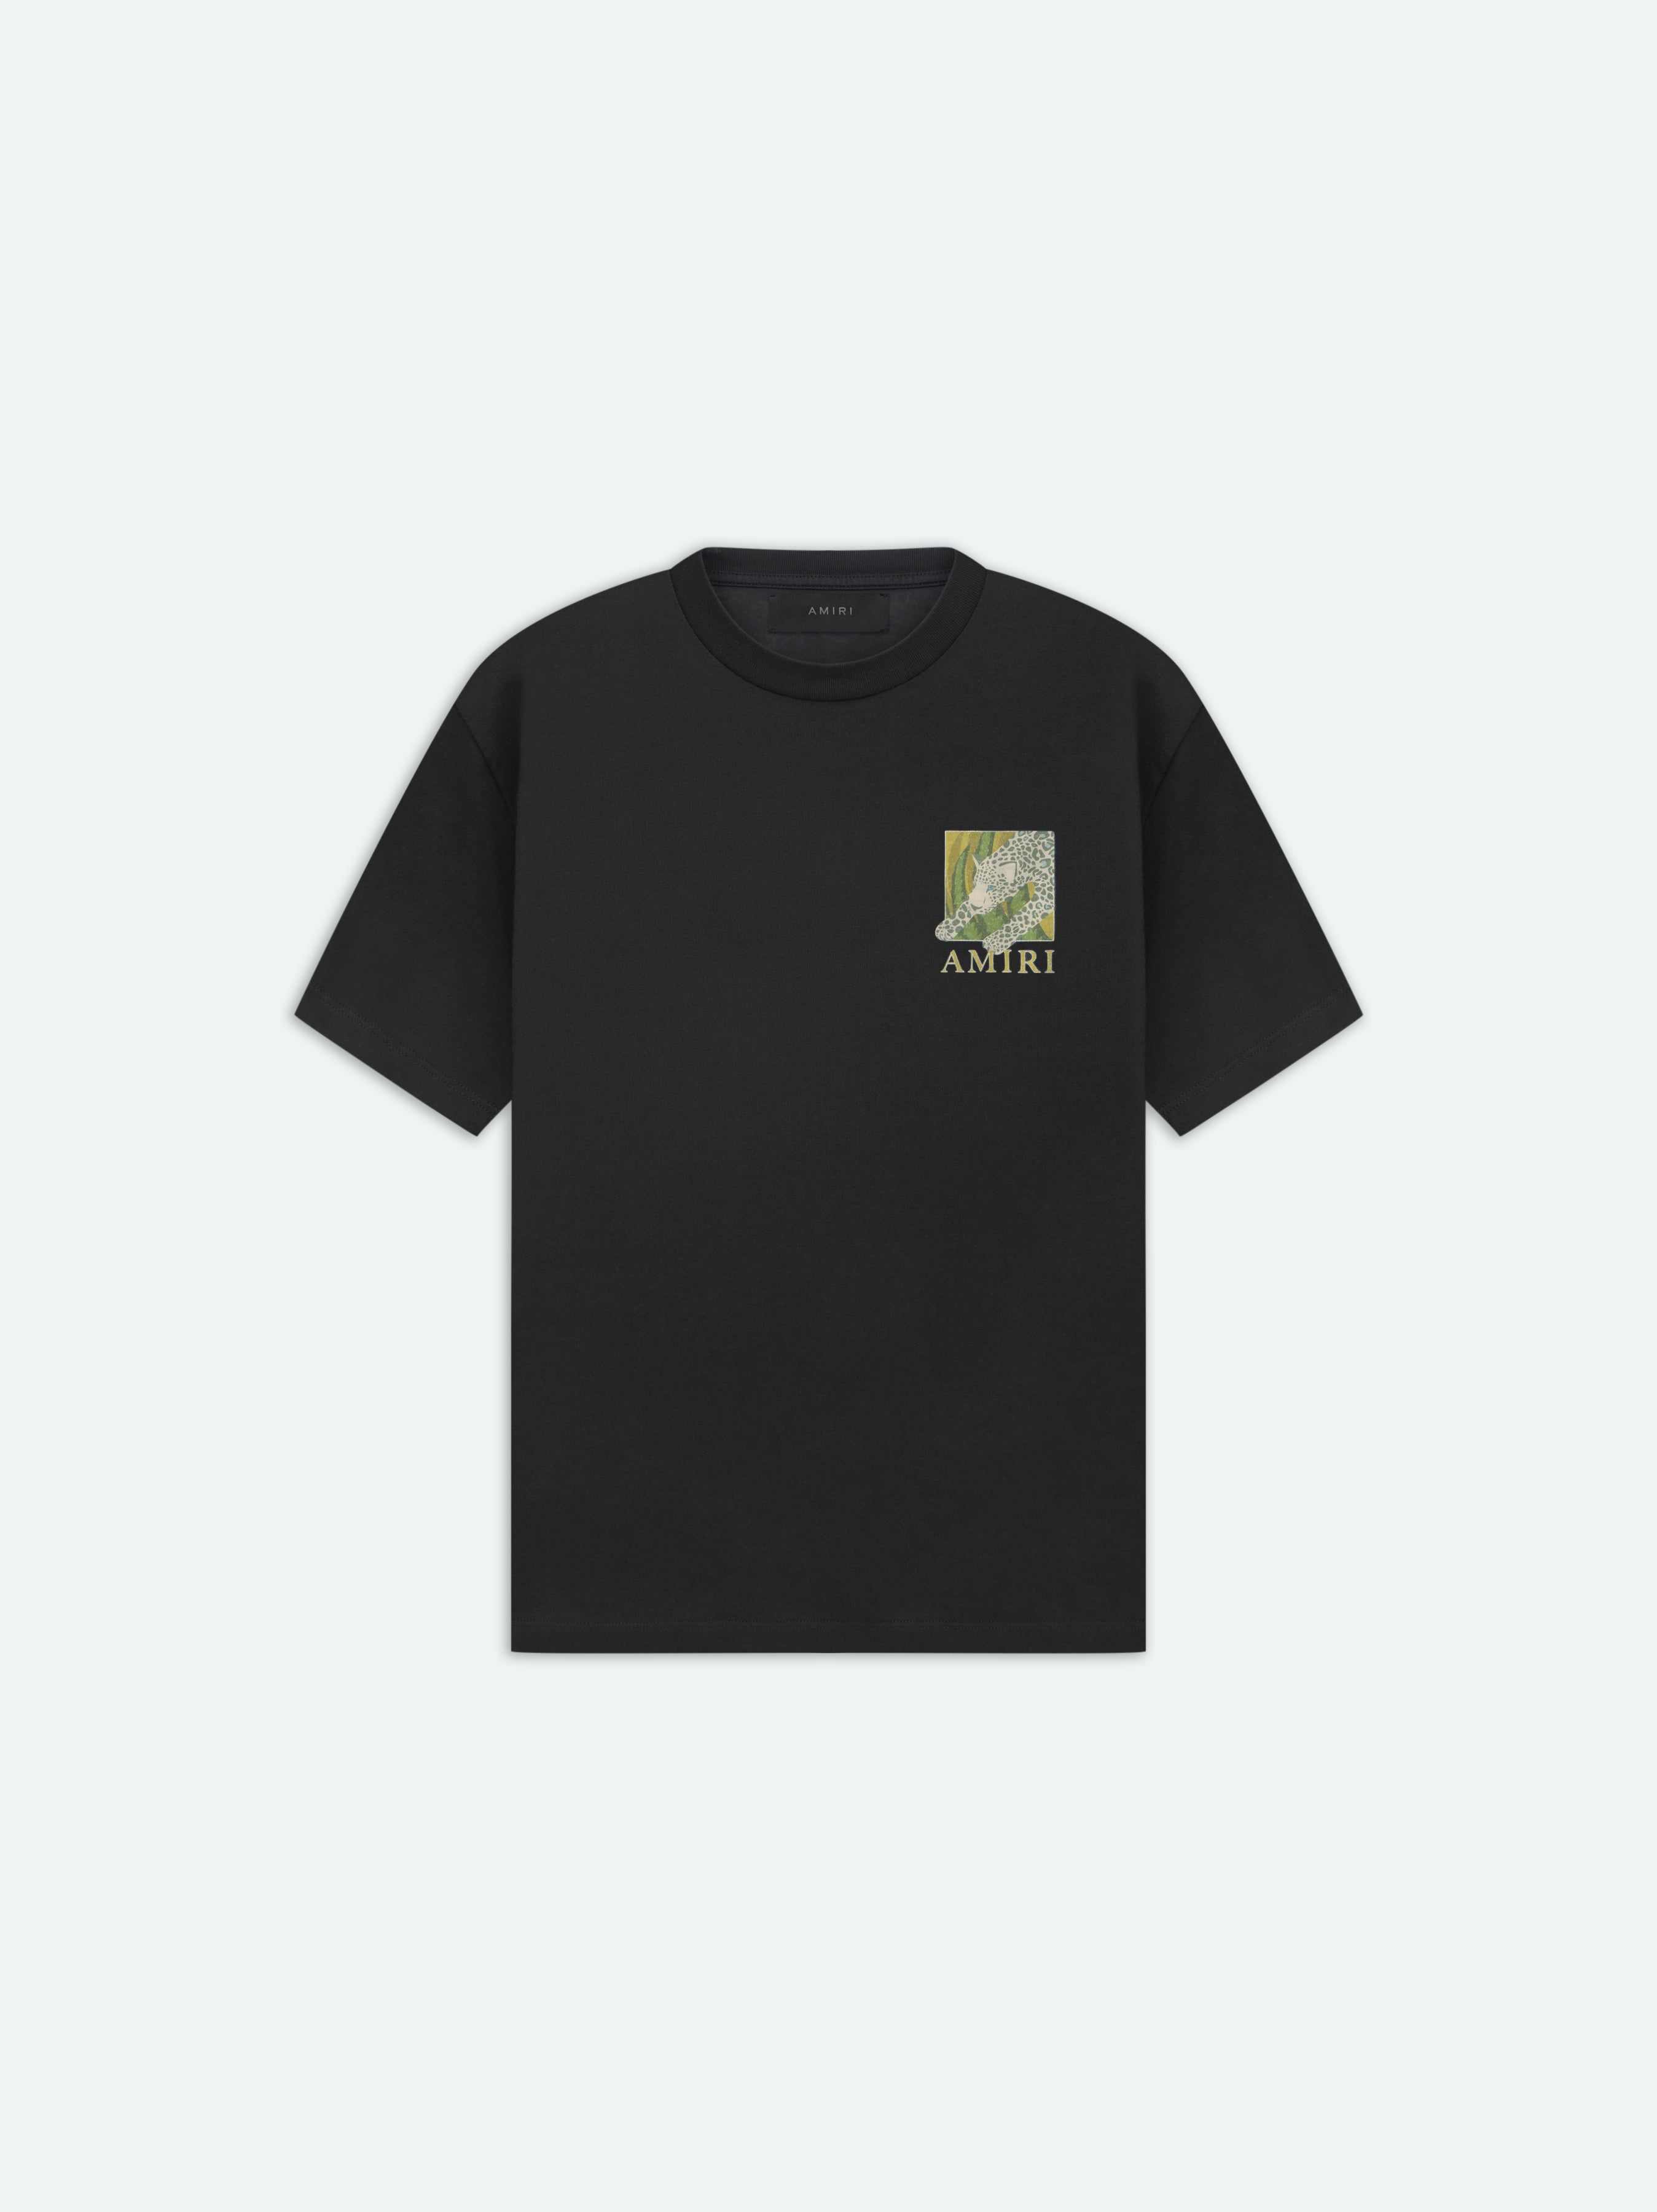 Product LEOPARD TEE - Black featured image